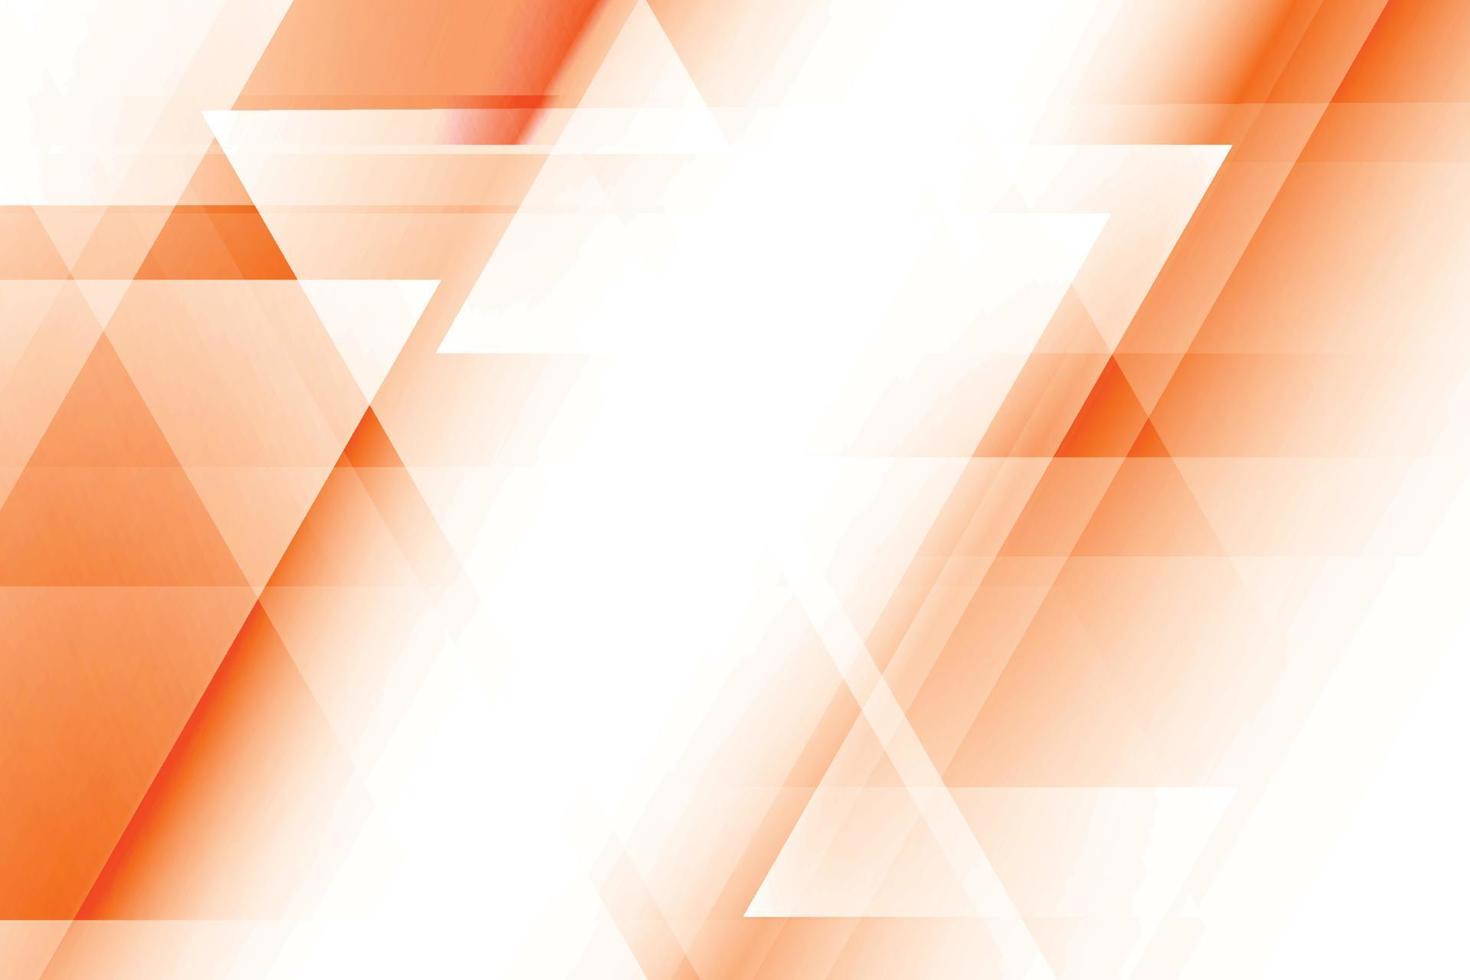 Abstract orange and white color background with geometric tritangle shape. Vector illustration.